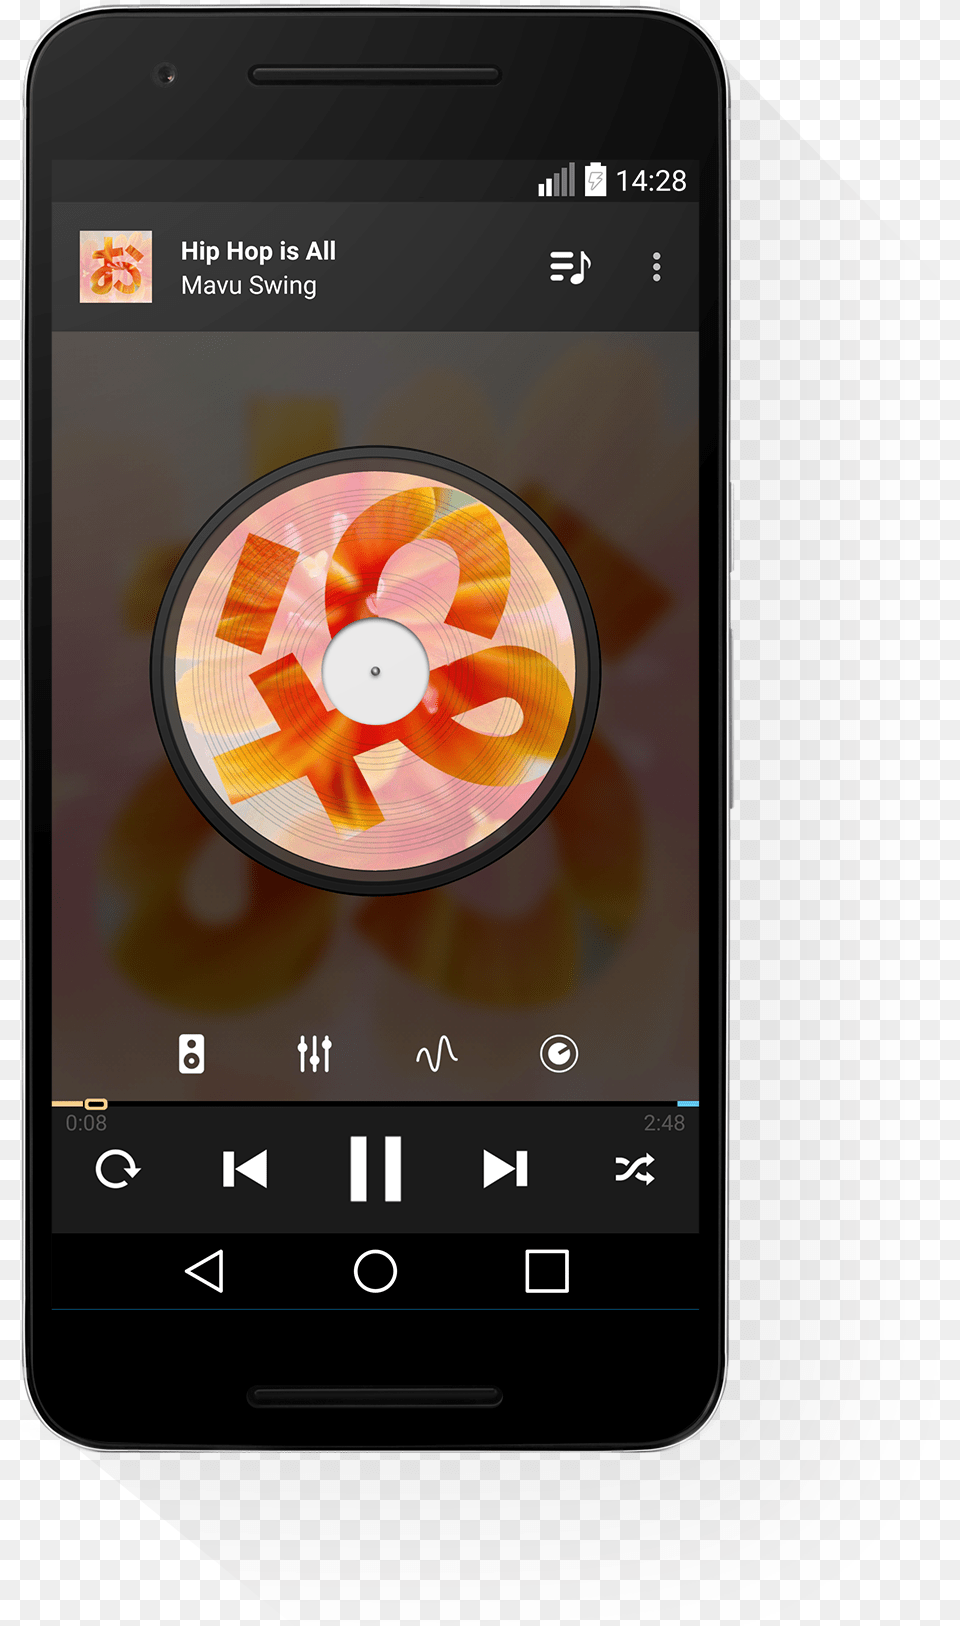 A Smart Music Player To Listen To Your Tracks Smartphone, Electronics, Mobile Phone, Phone Png